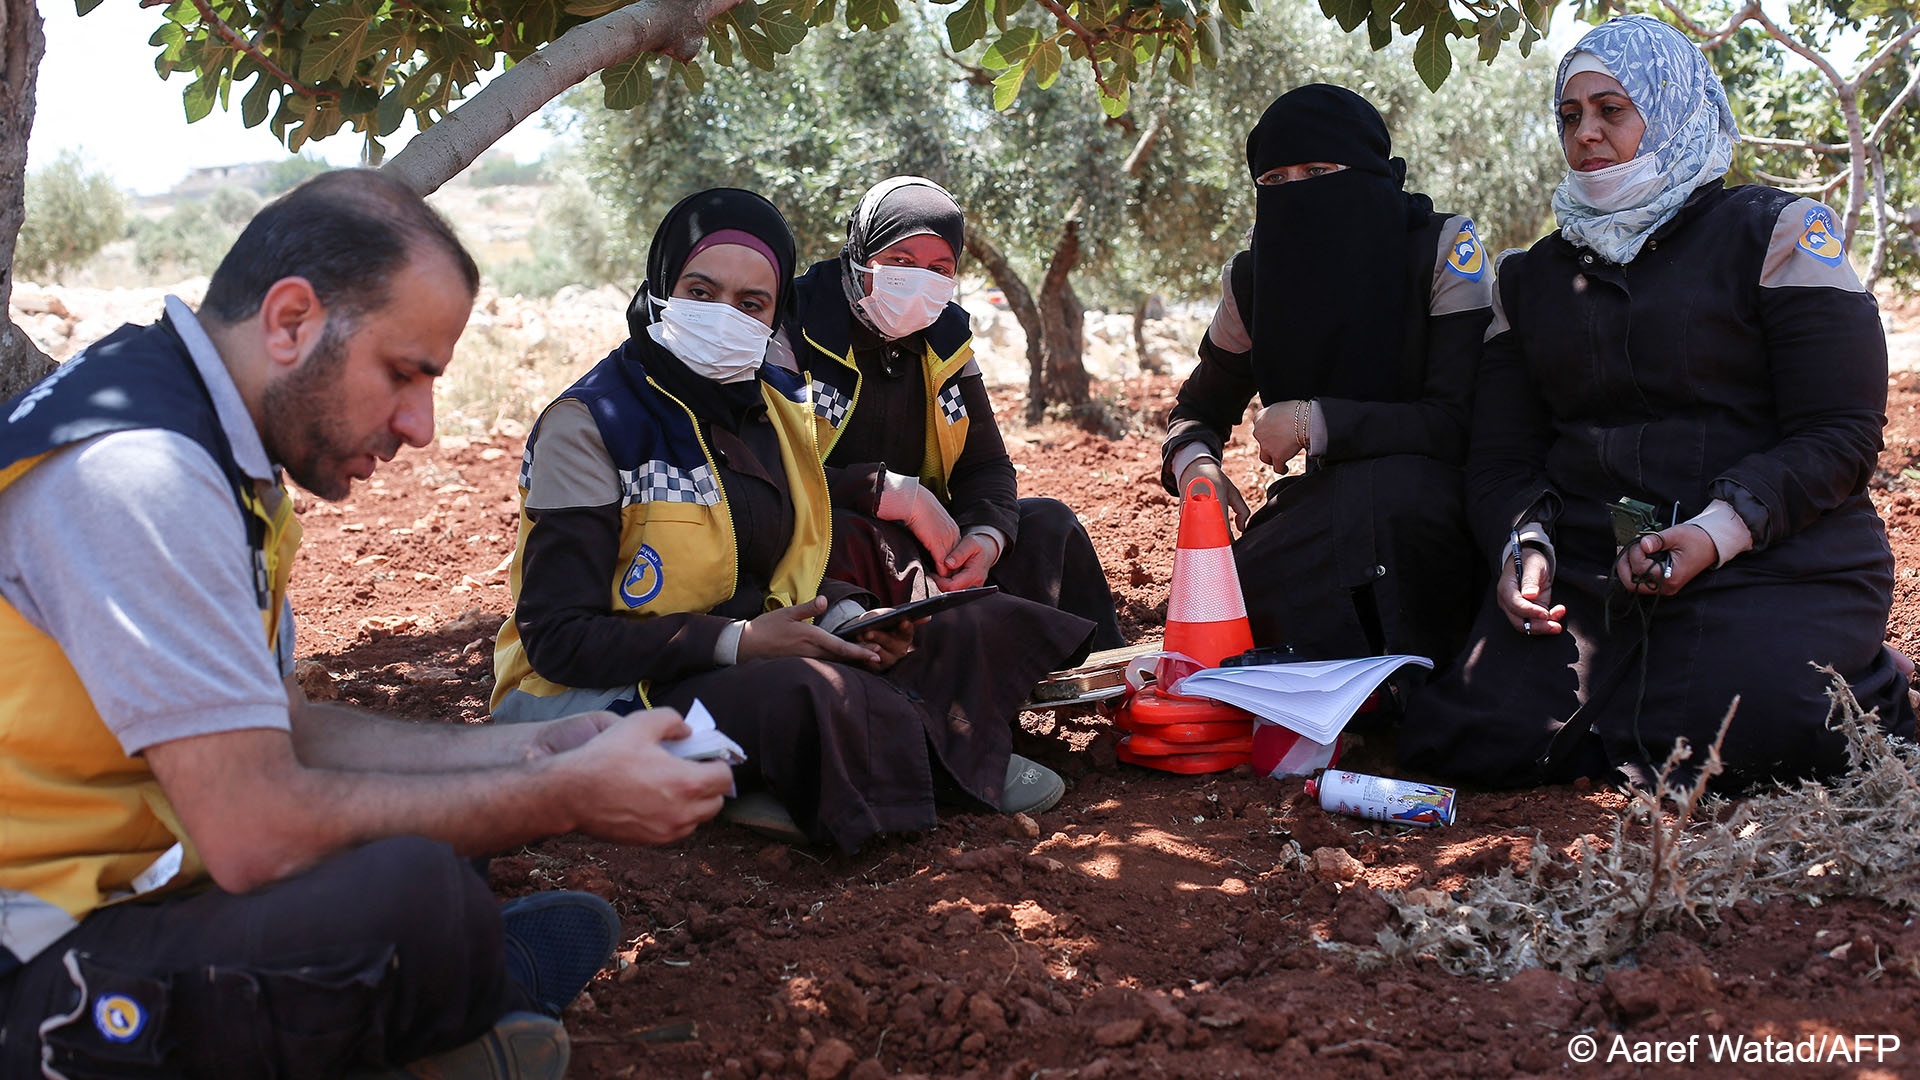 Members of the Syrian civil defence group the White Helmets and volunteers take part in a course on how to locate and neutralise unexploded ordnance Members of the Syrian civil defence group the White Helmets and volunteers take part in a course on how to locate and neutralise unexploded ordnance (photo: Aaref WATAD/AFP)